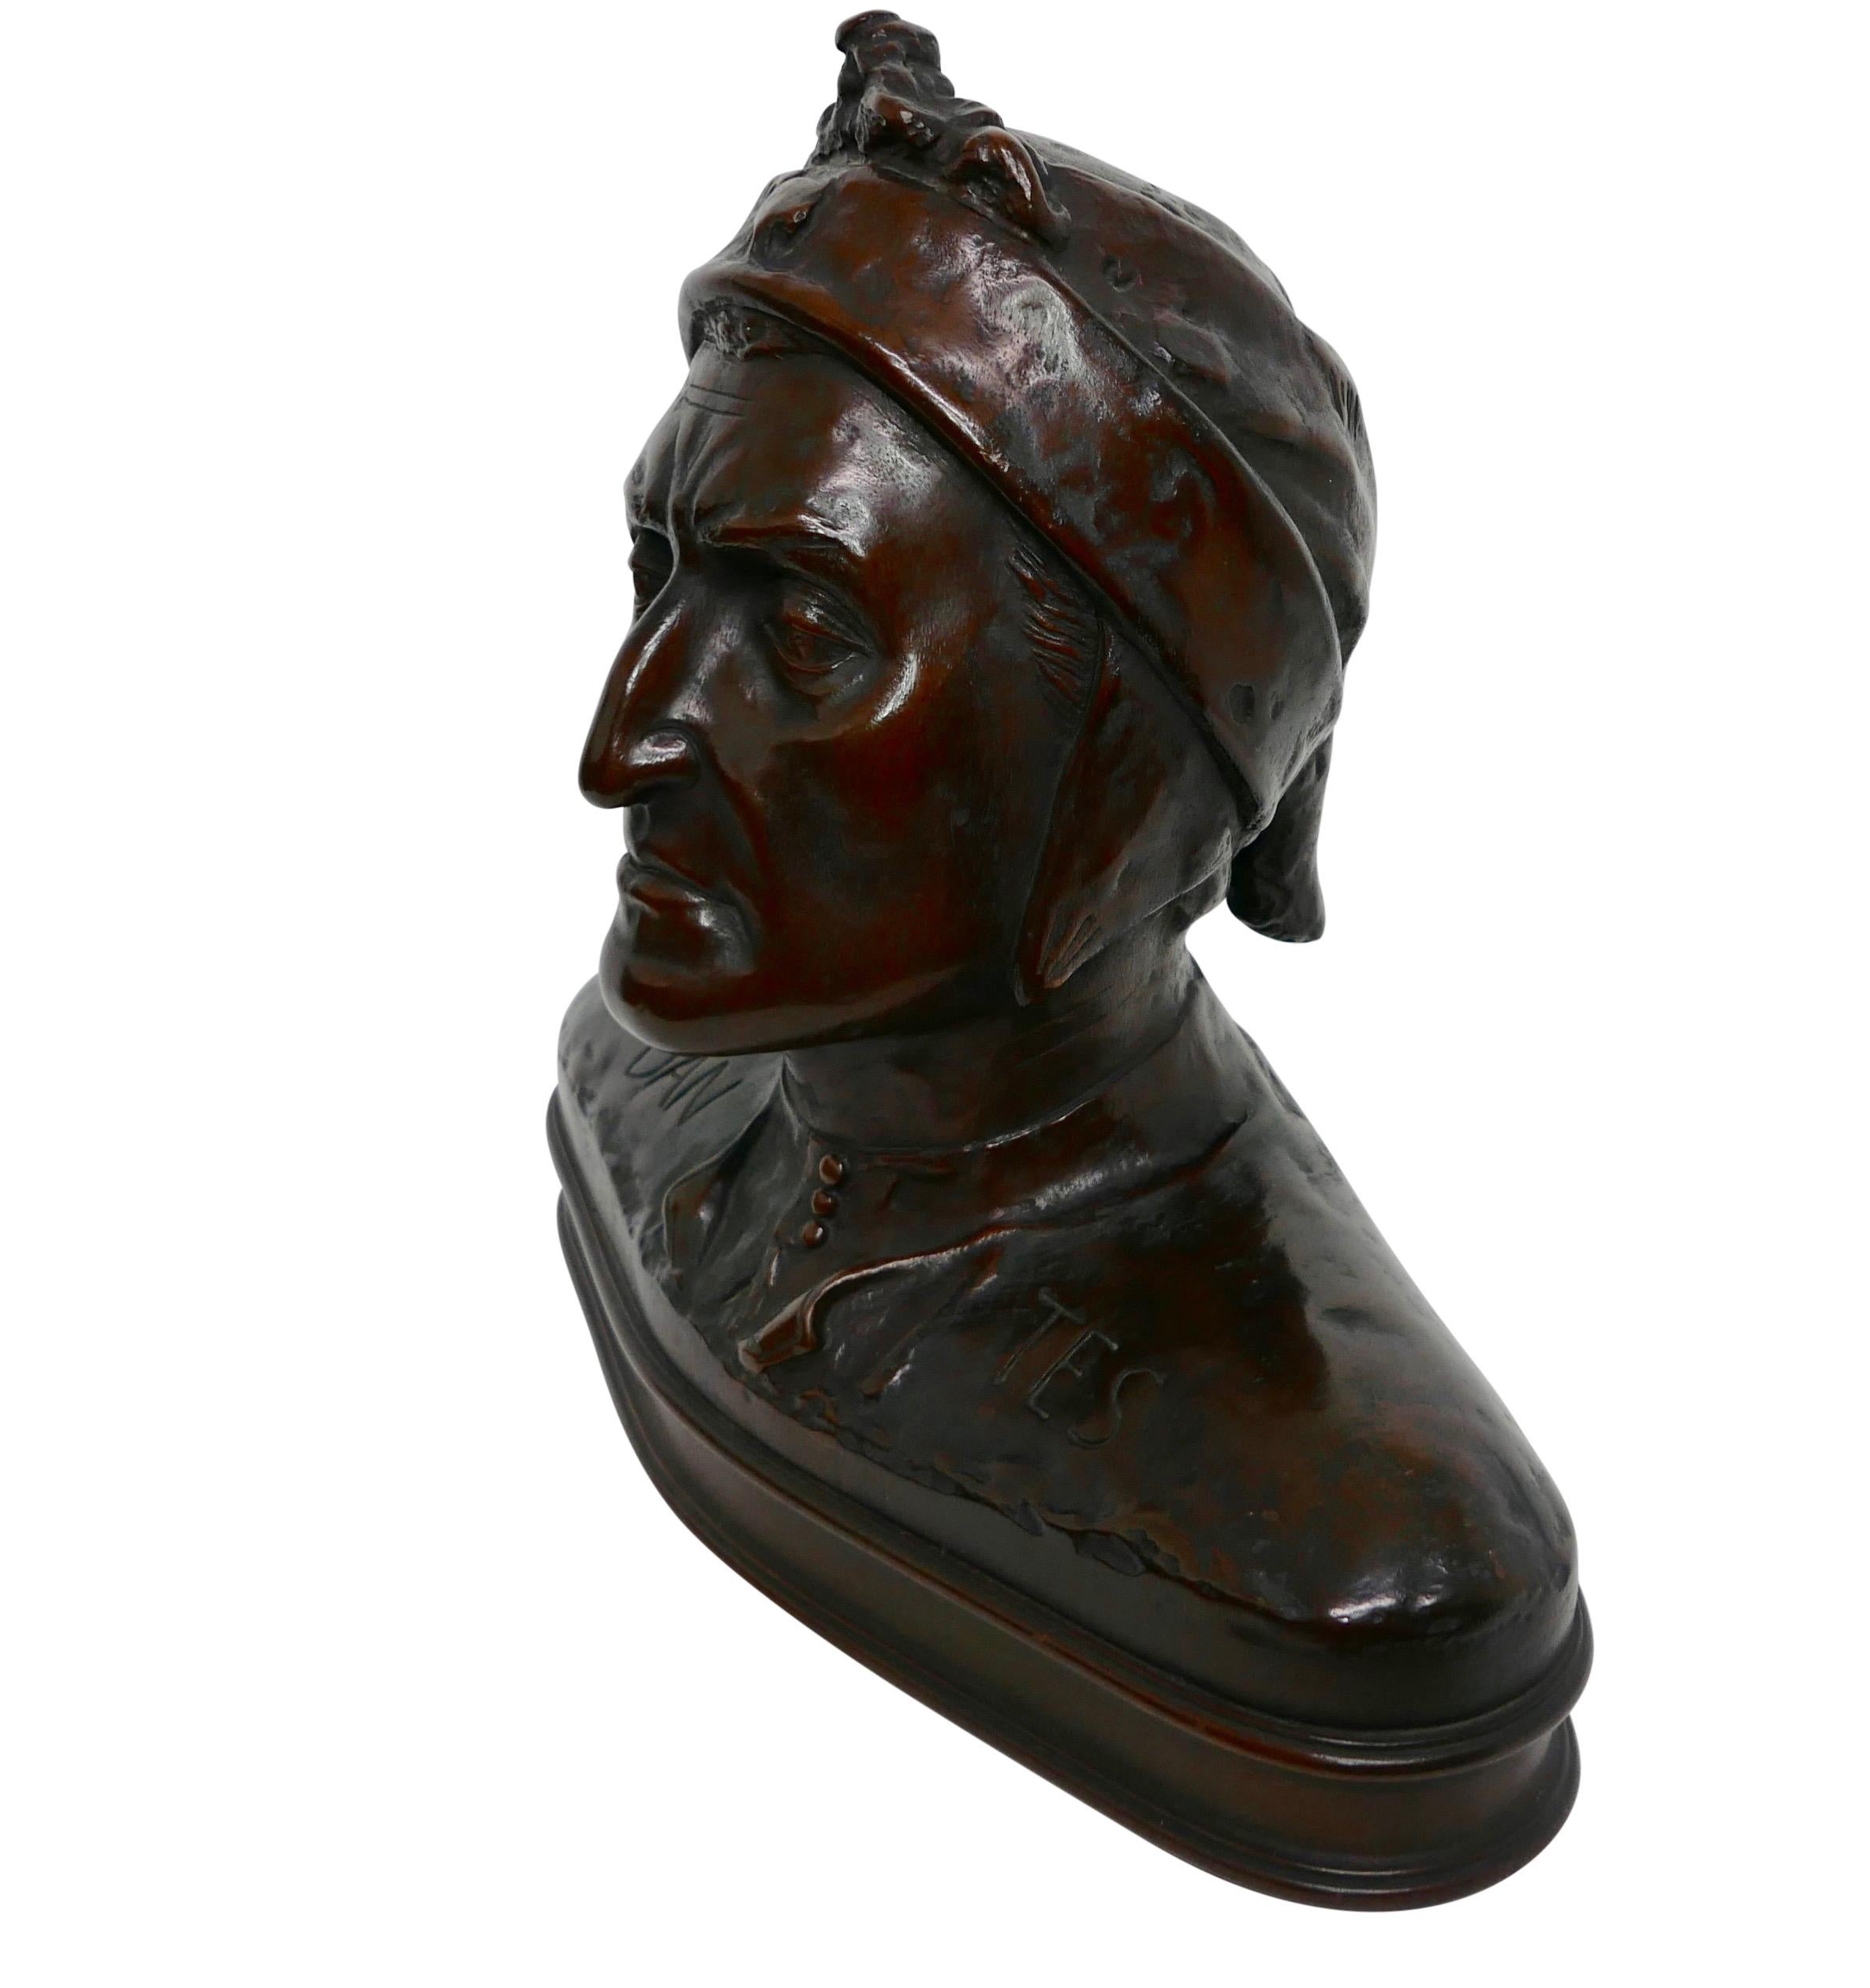 Hand Carved Wooden Bust Sculpture of Dantes, Early 20th Century 7